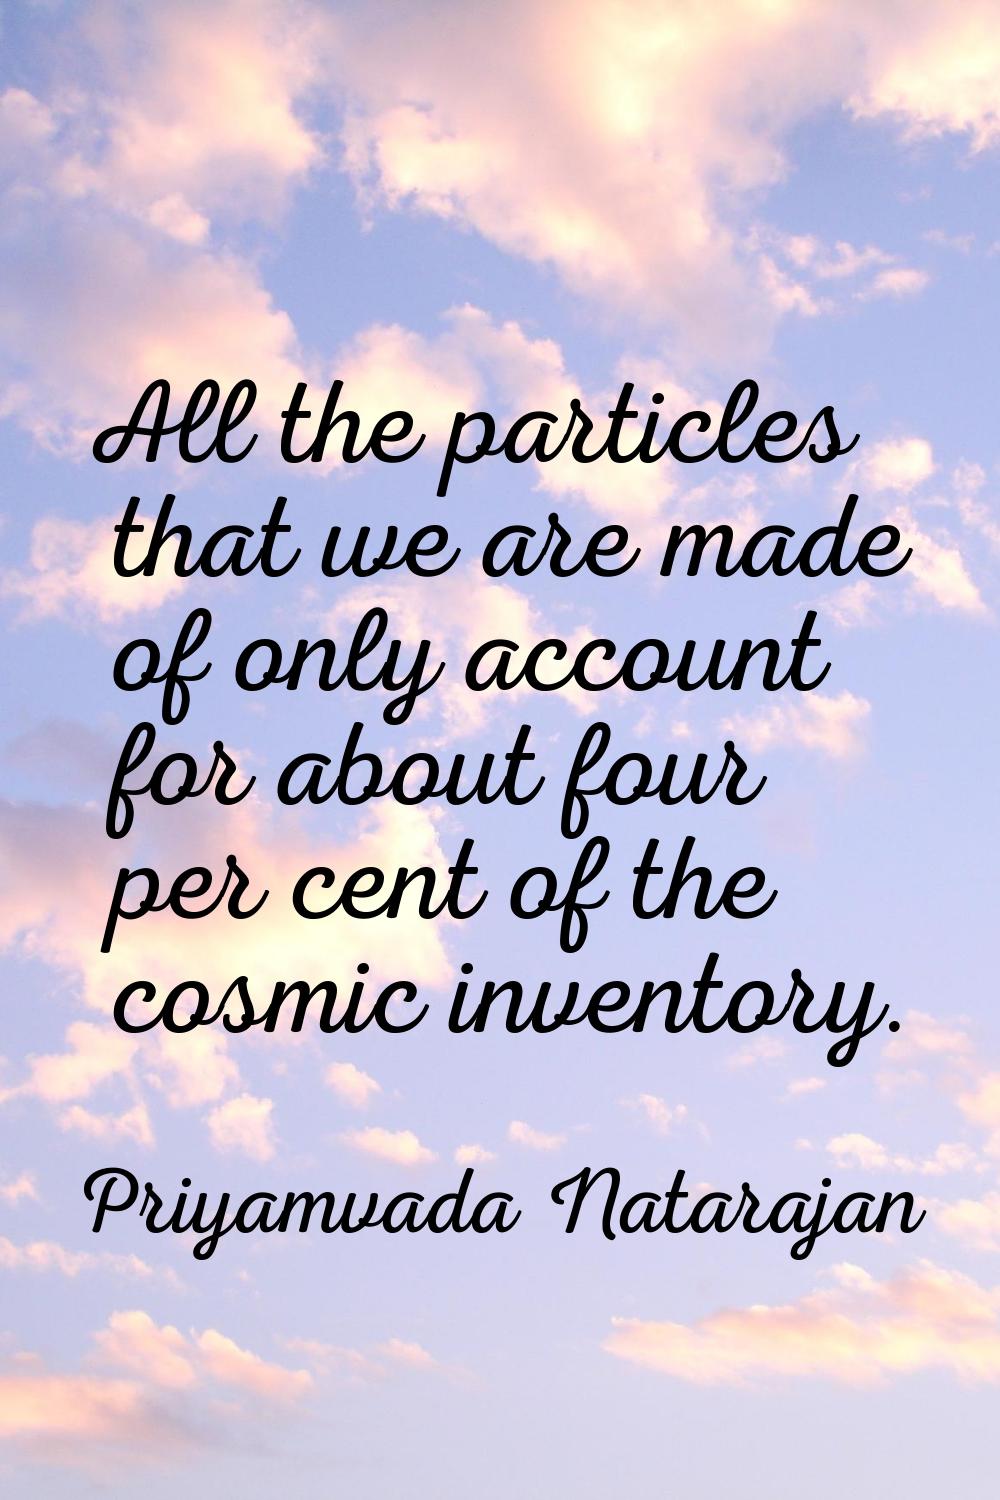 All the particles that we are made of only account for about four per cent of the cosmic inventory.